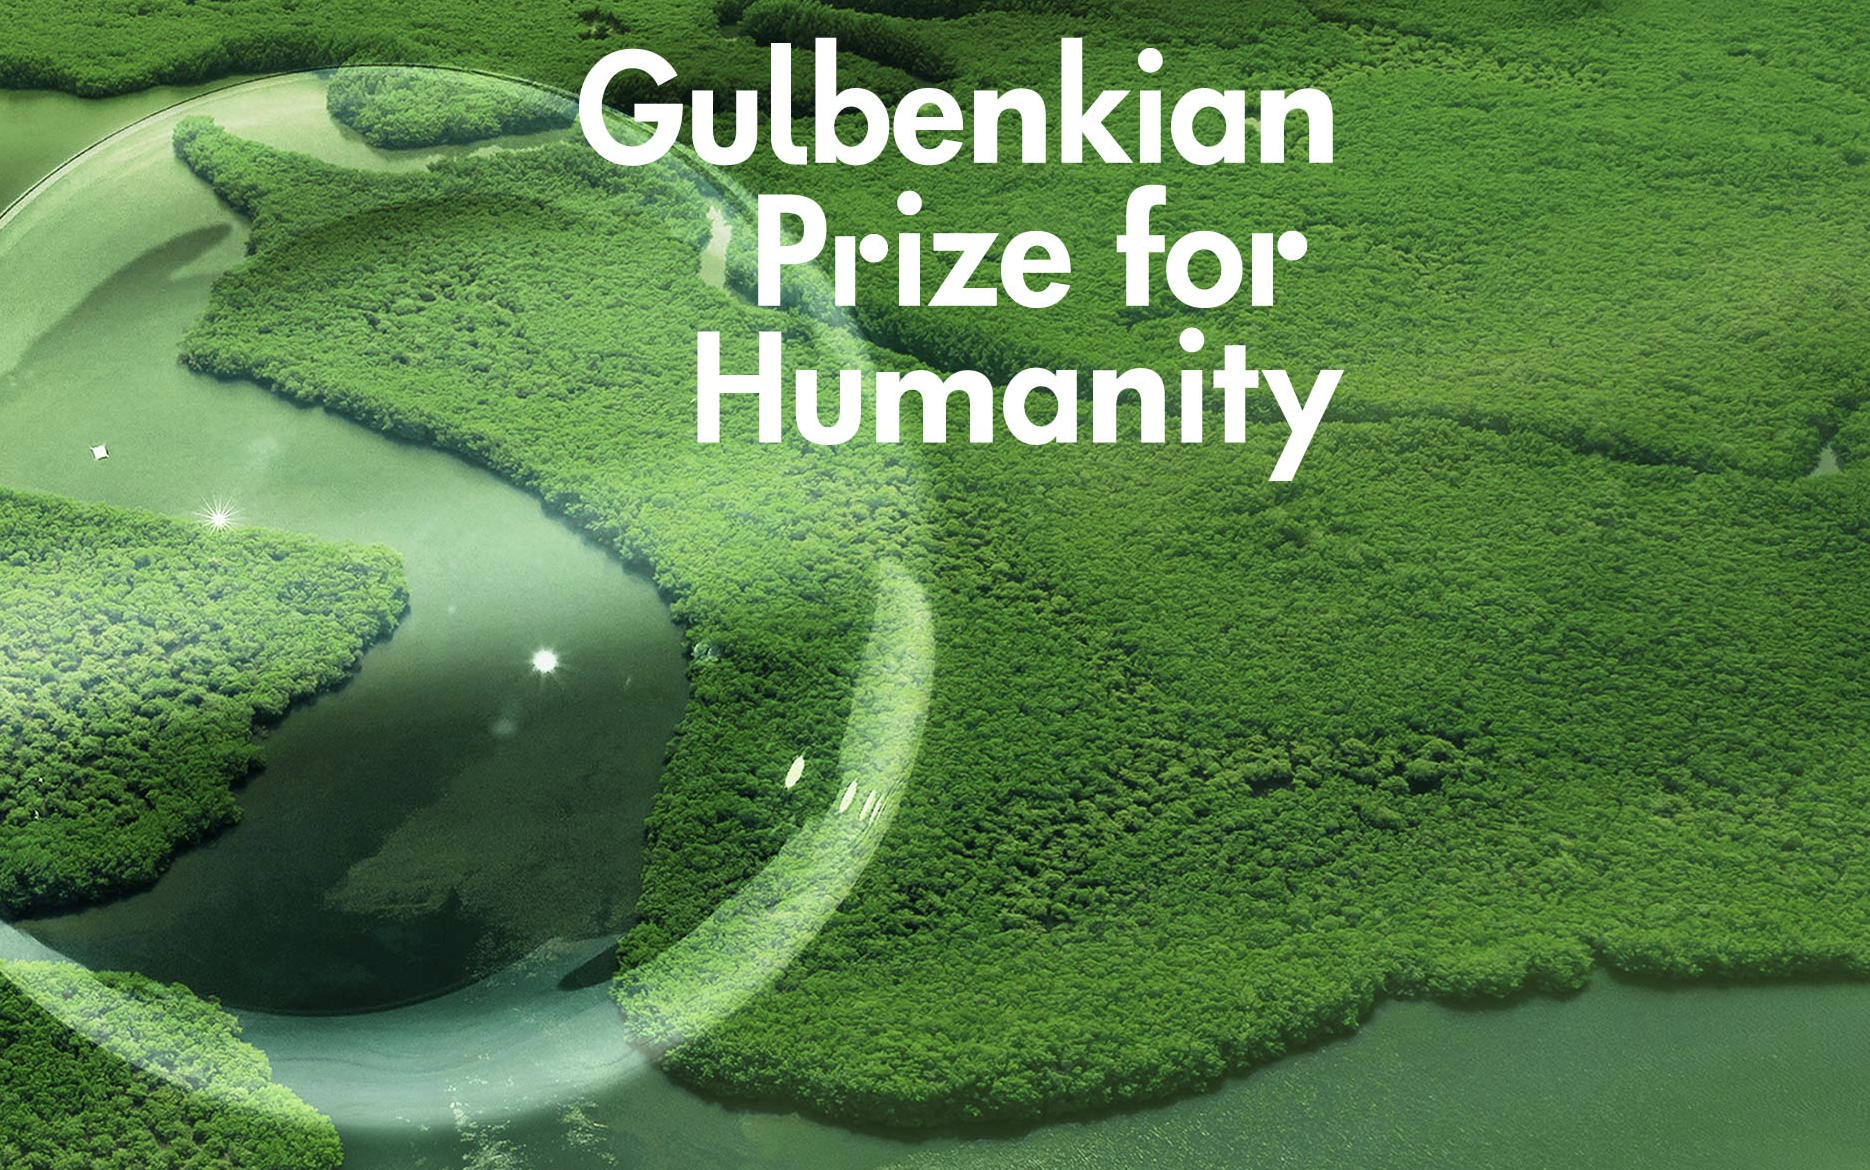 Gulbenkian Prize for Humanity. Text set over a lush green background, with a transparent globe.